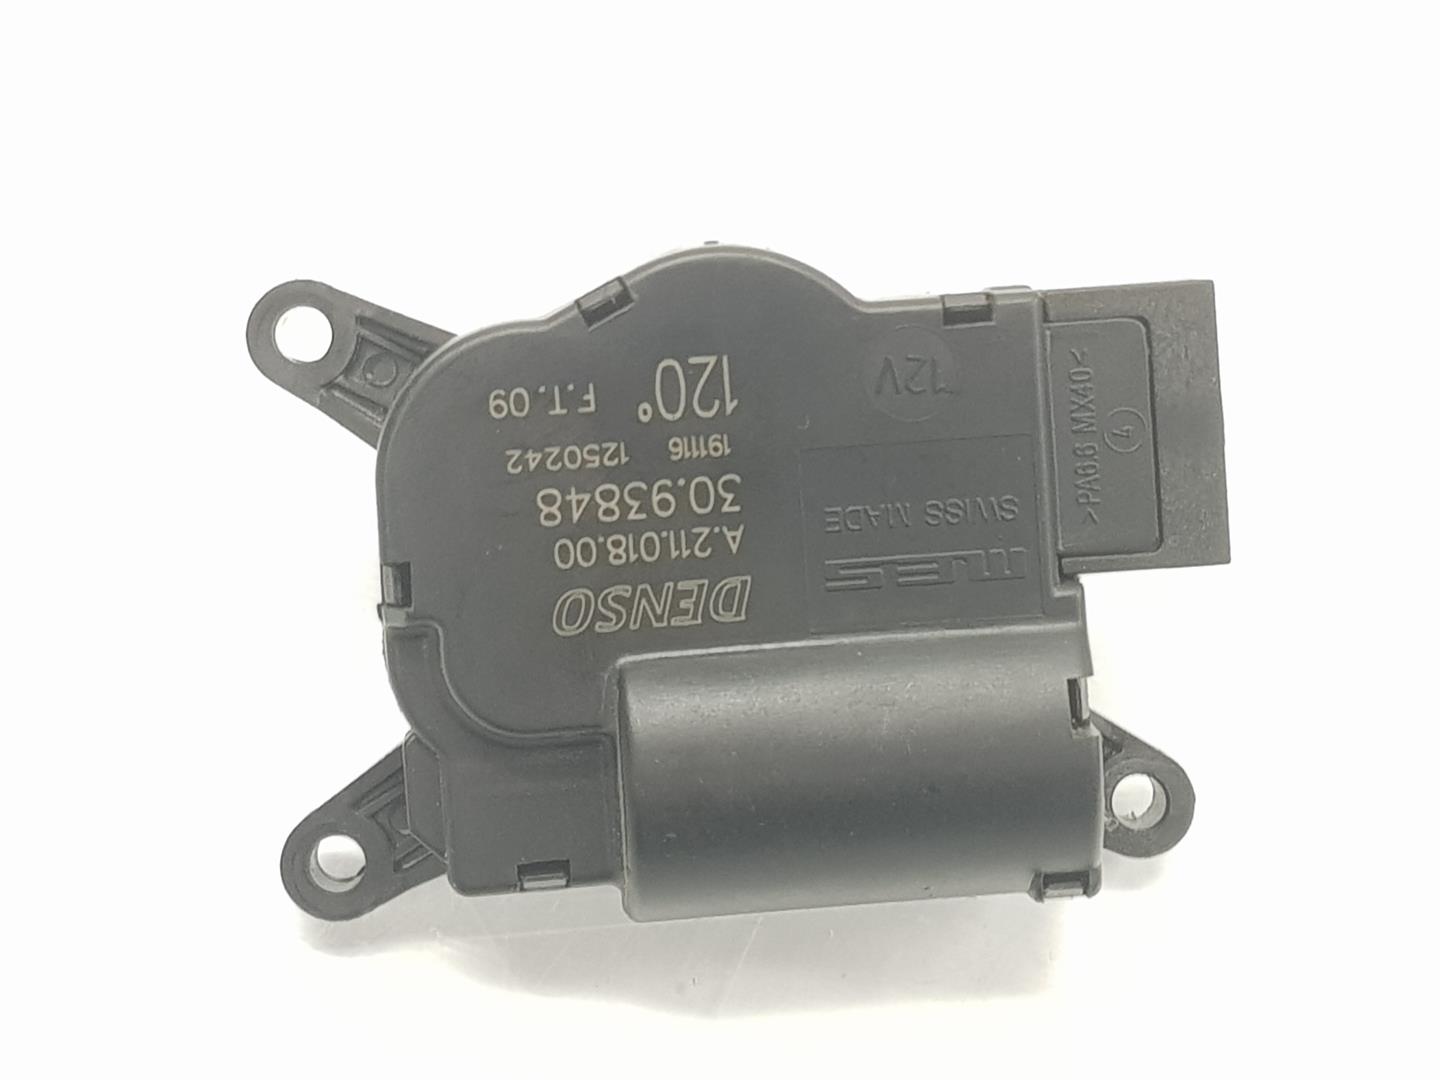 RENAULT Master 3 generation (2010-2023) Air Conditioner Air Flow Valve Motor A21101800, A21101800 24221954